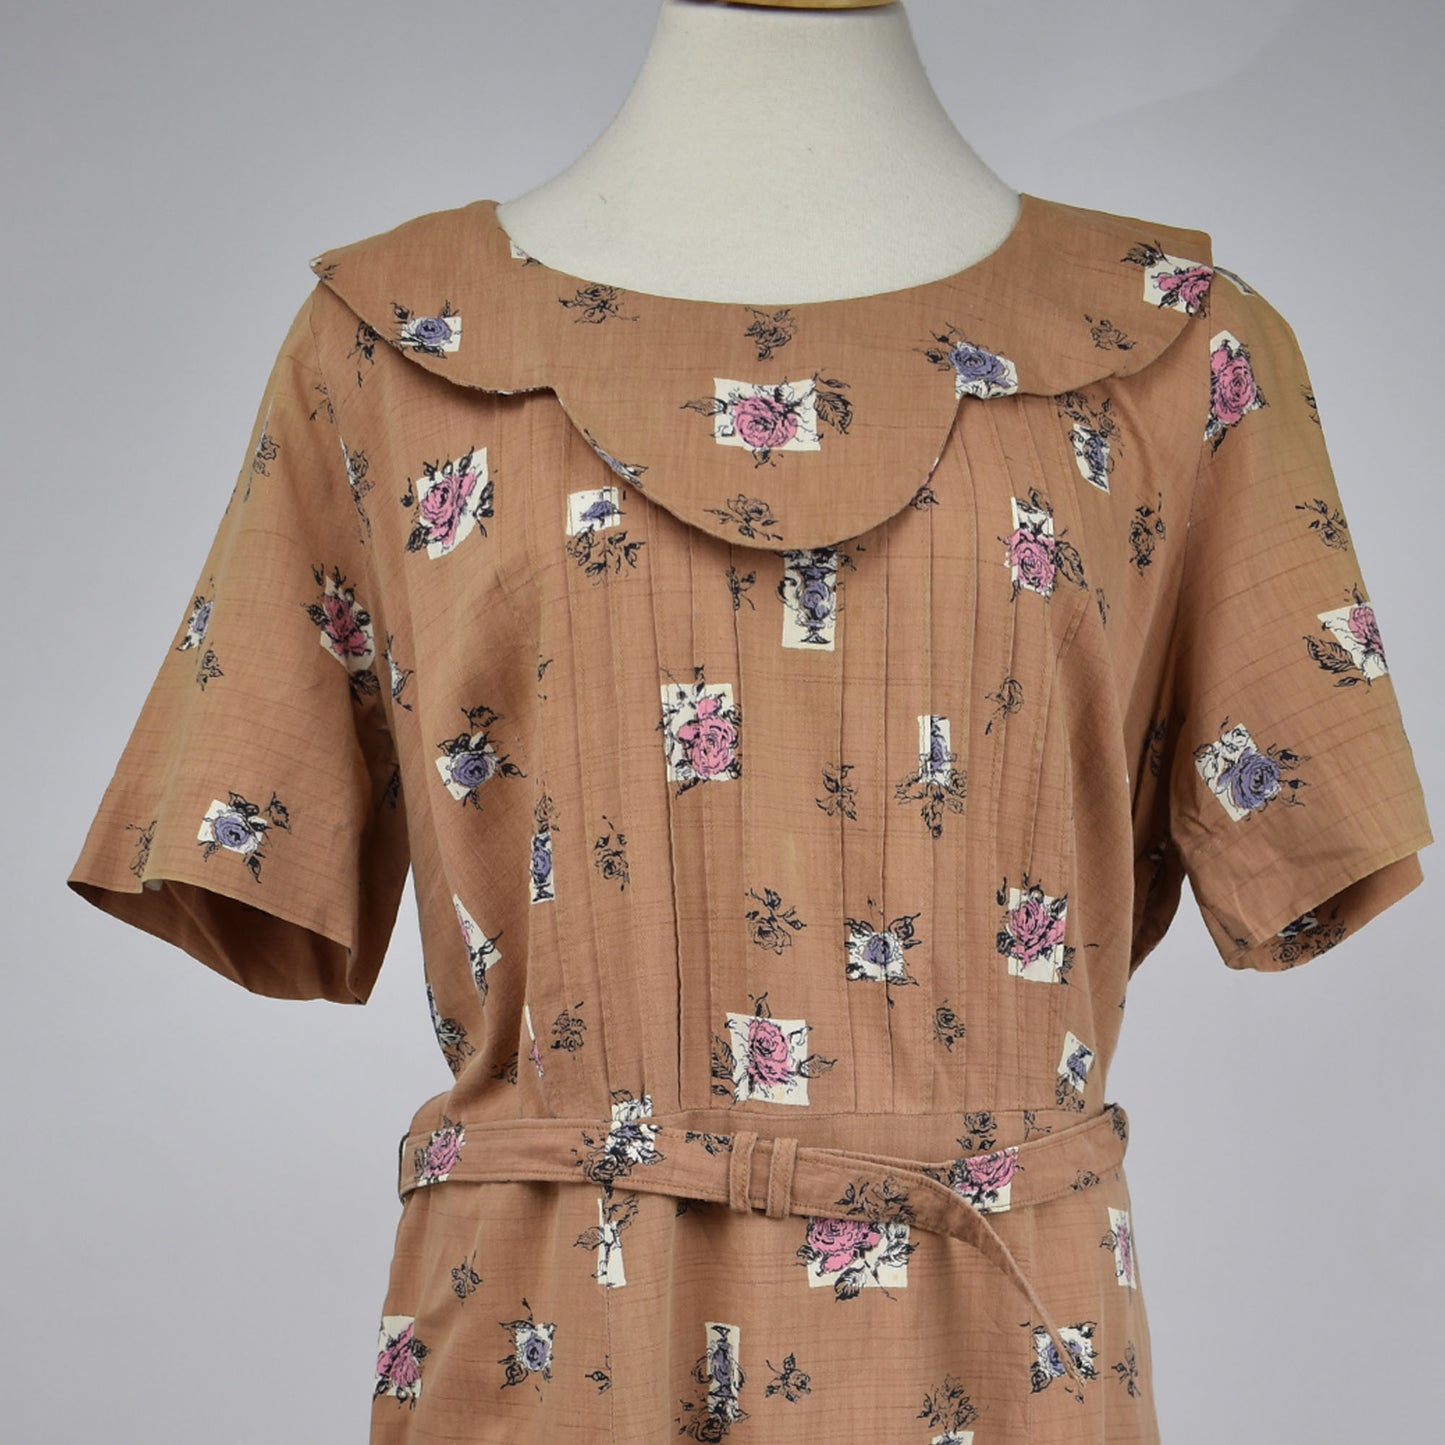 Vintage Unique Bib Collared Brown Floral Dress with Belted Waist and Front Pleats